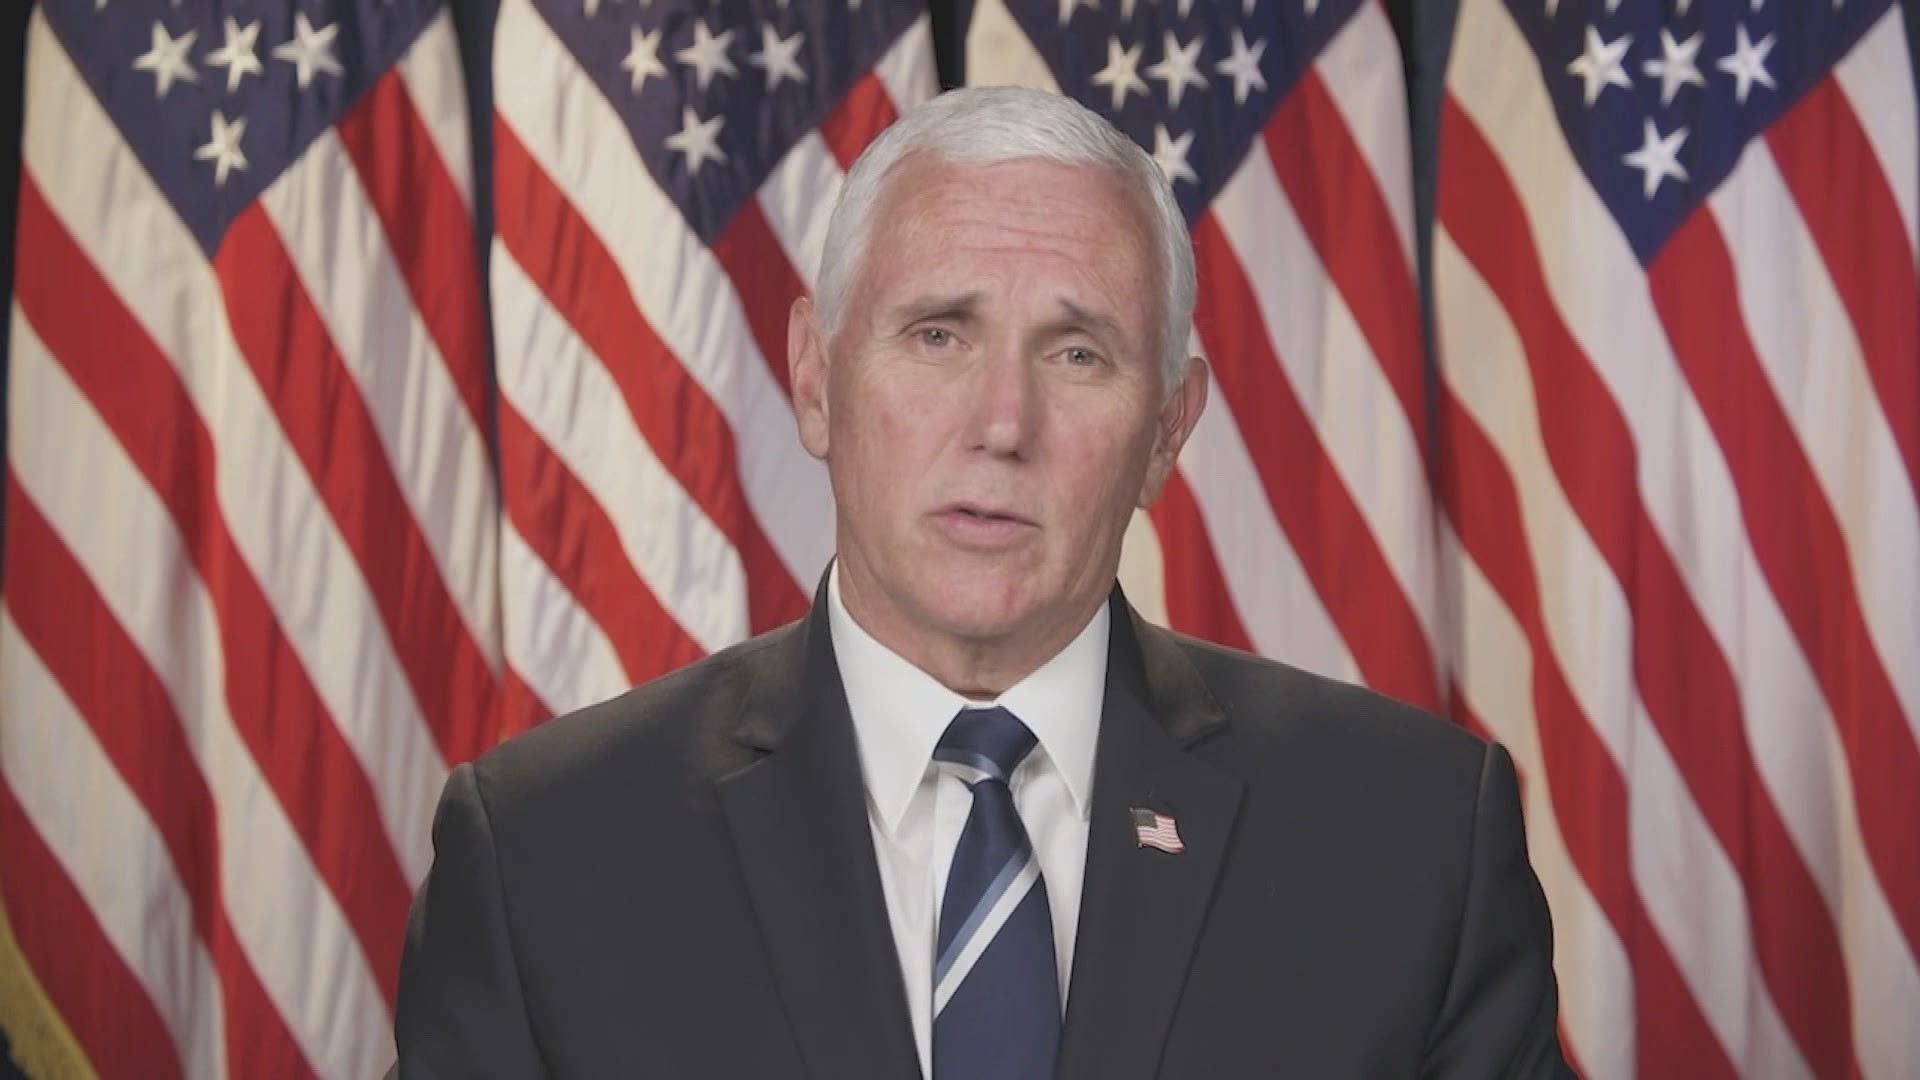 In an exclusive interview with Local 5 on Tuesday, Vice President Mike Pence defended President Donald Trump following his recent statements on the China trade deal.